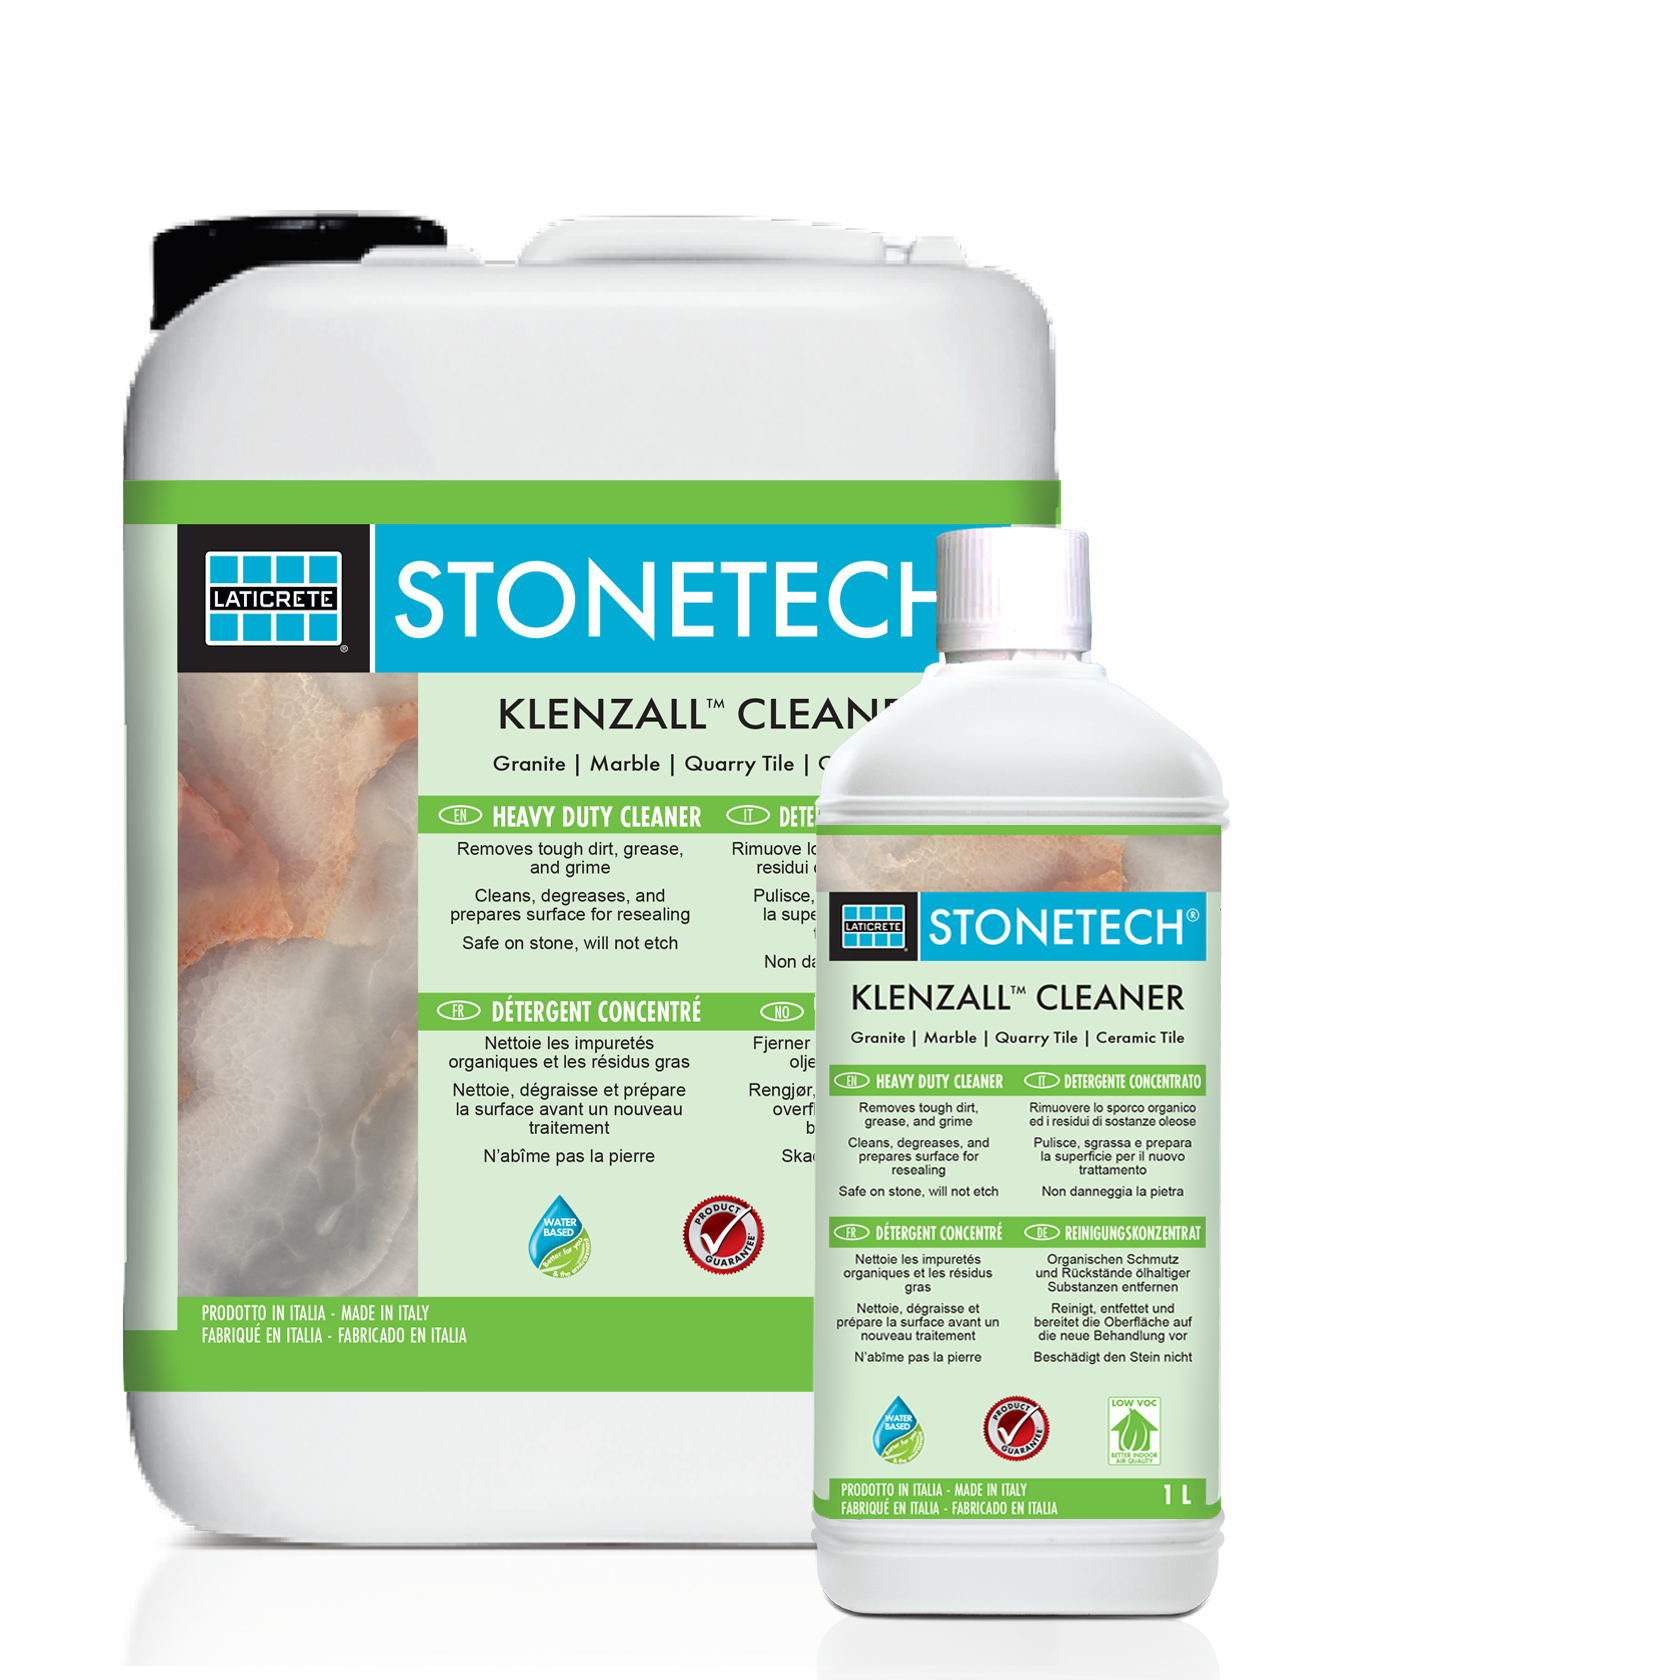 STONETECH® KLENZALL™ CLEANER